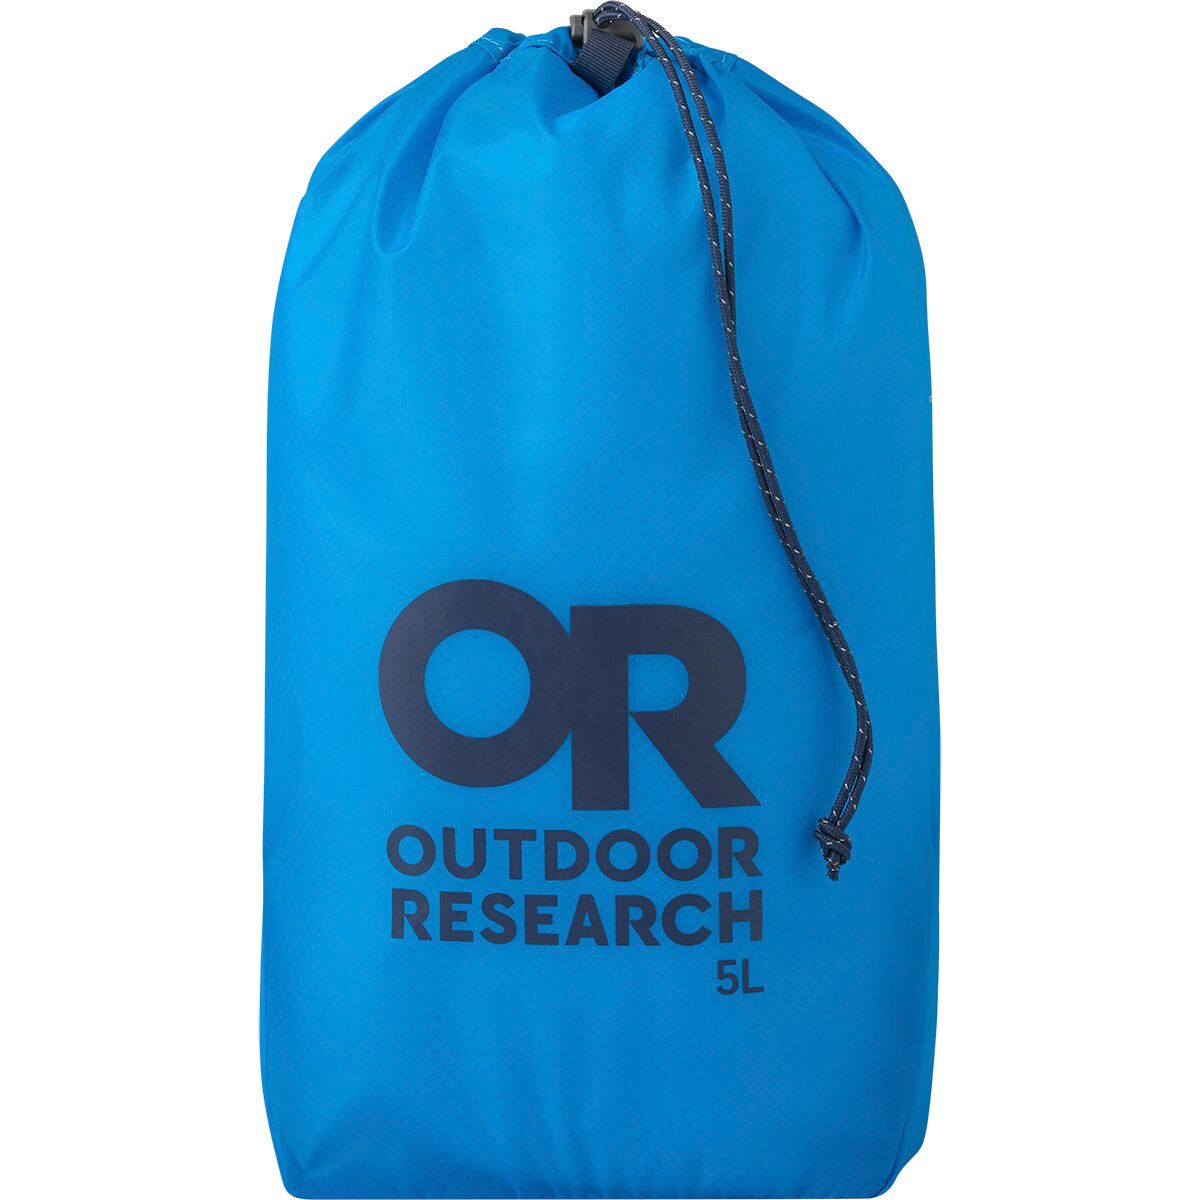 Outdoor Research PackOut Ultralight 5L Stuff Sack